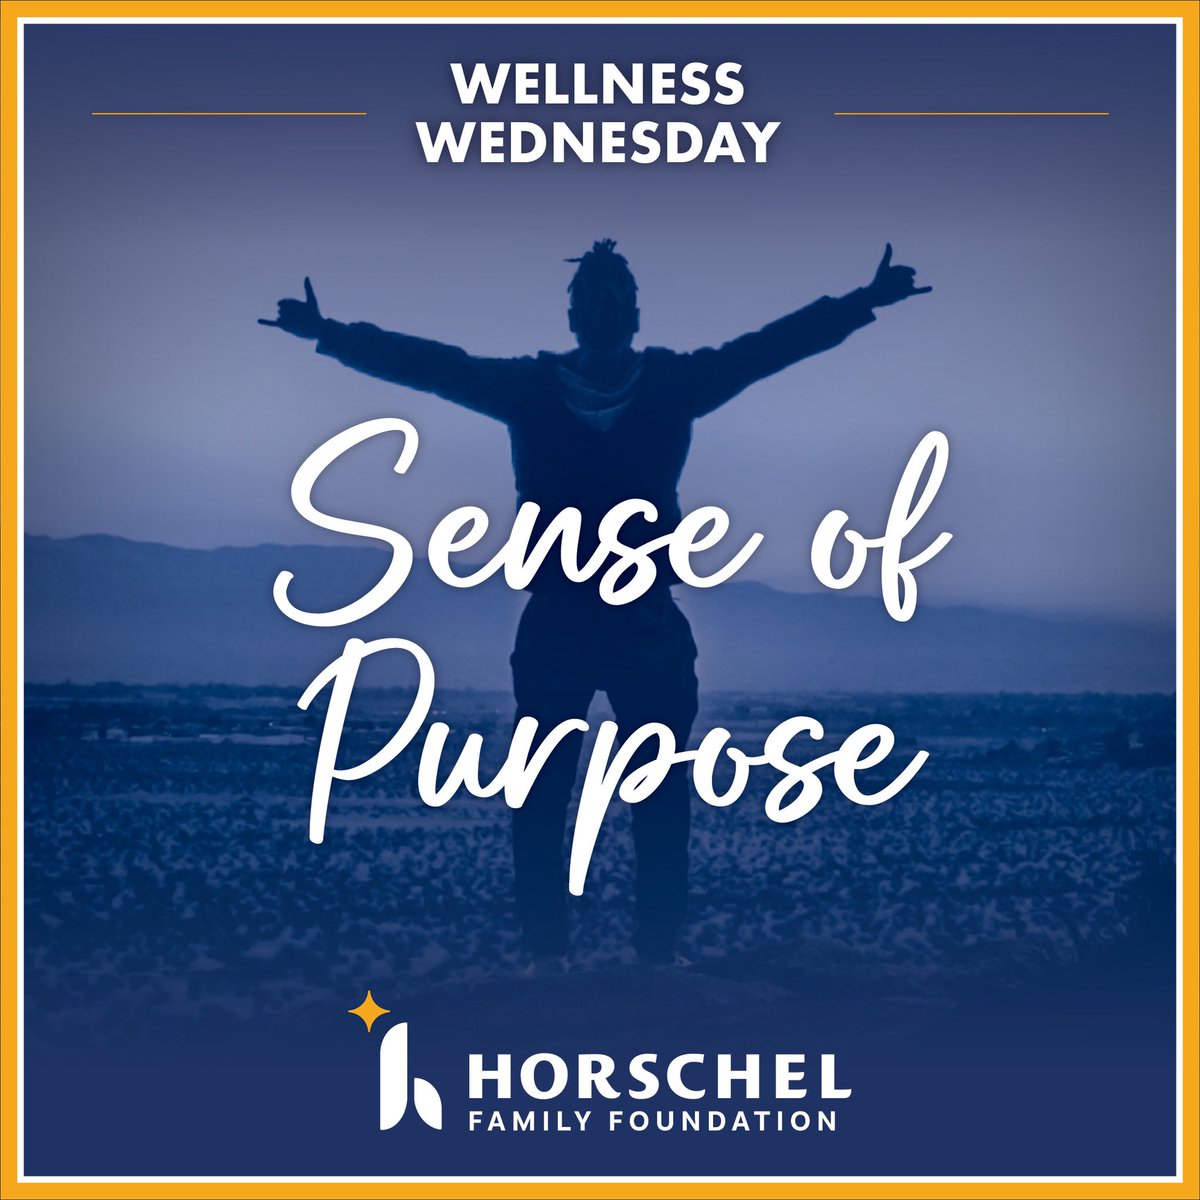 Finding purpose in life can be different for everyone. This could be through work, volunteering, learning new skills, or exploring your spirituality. What makes you feel useful or needed. Invest your time in people and/or things that will enrich your life and bring you joy.